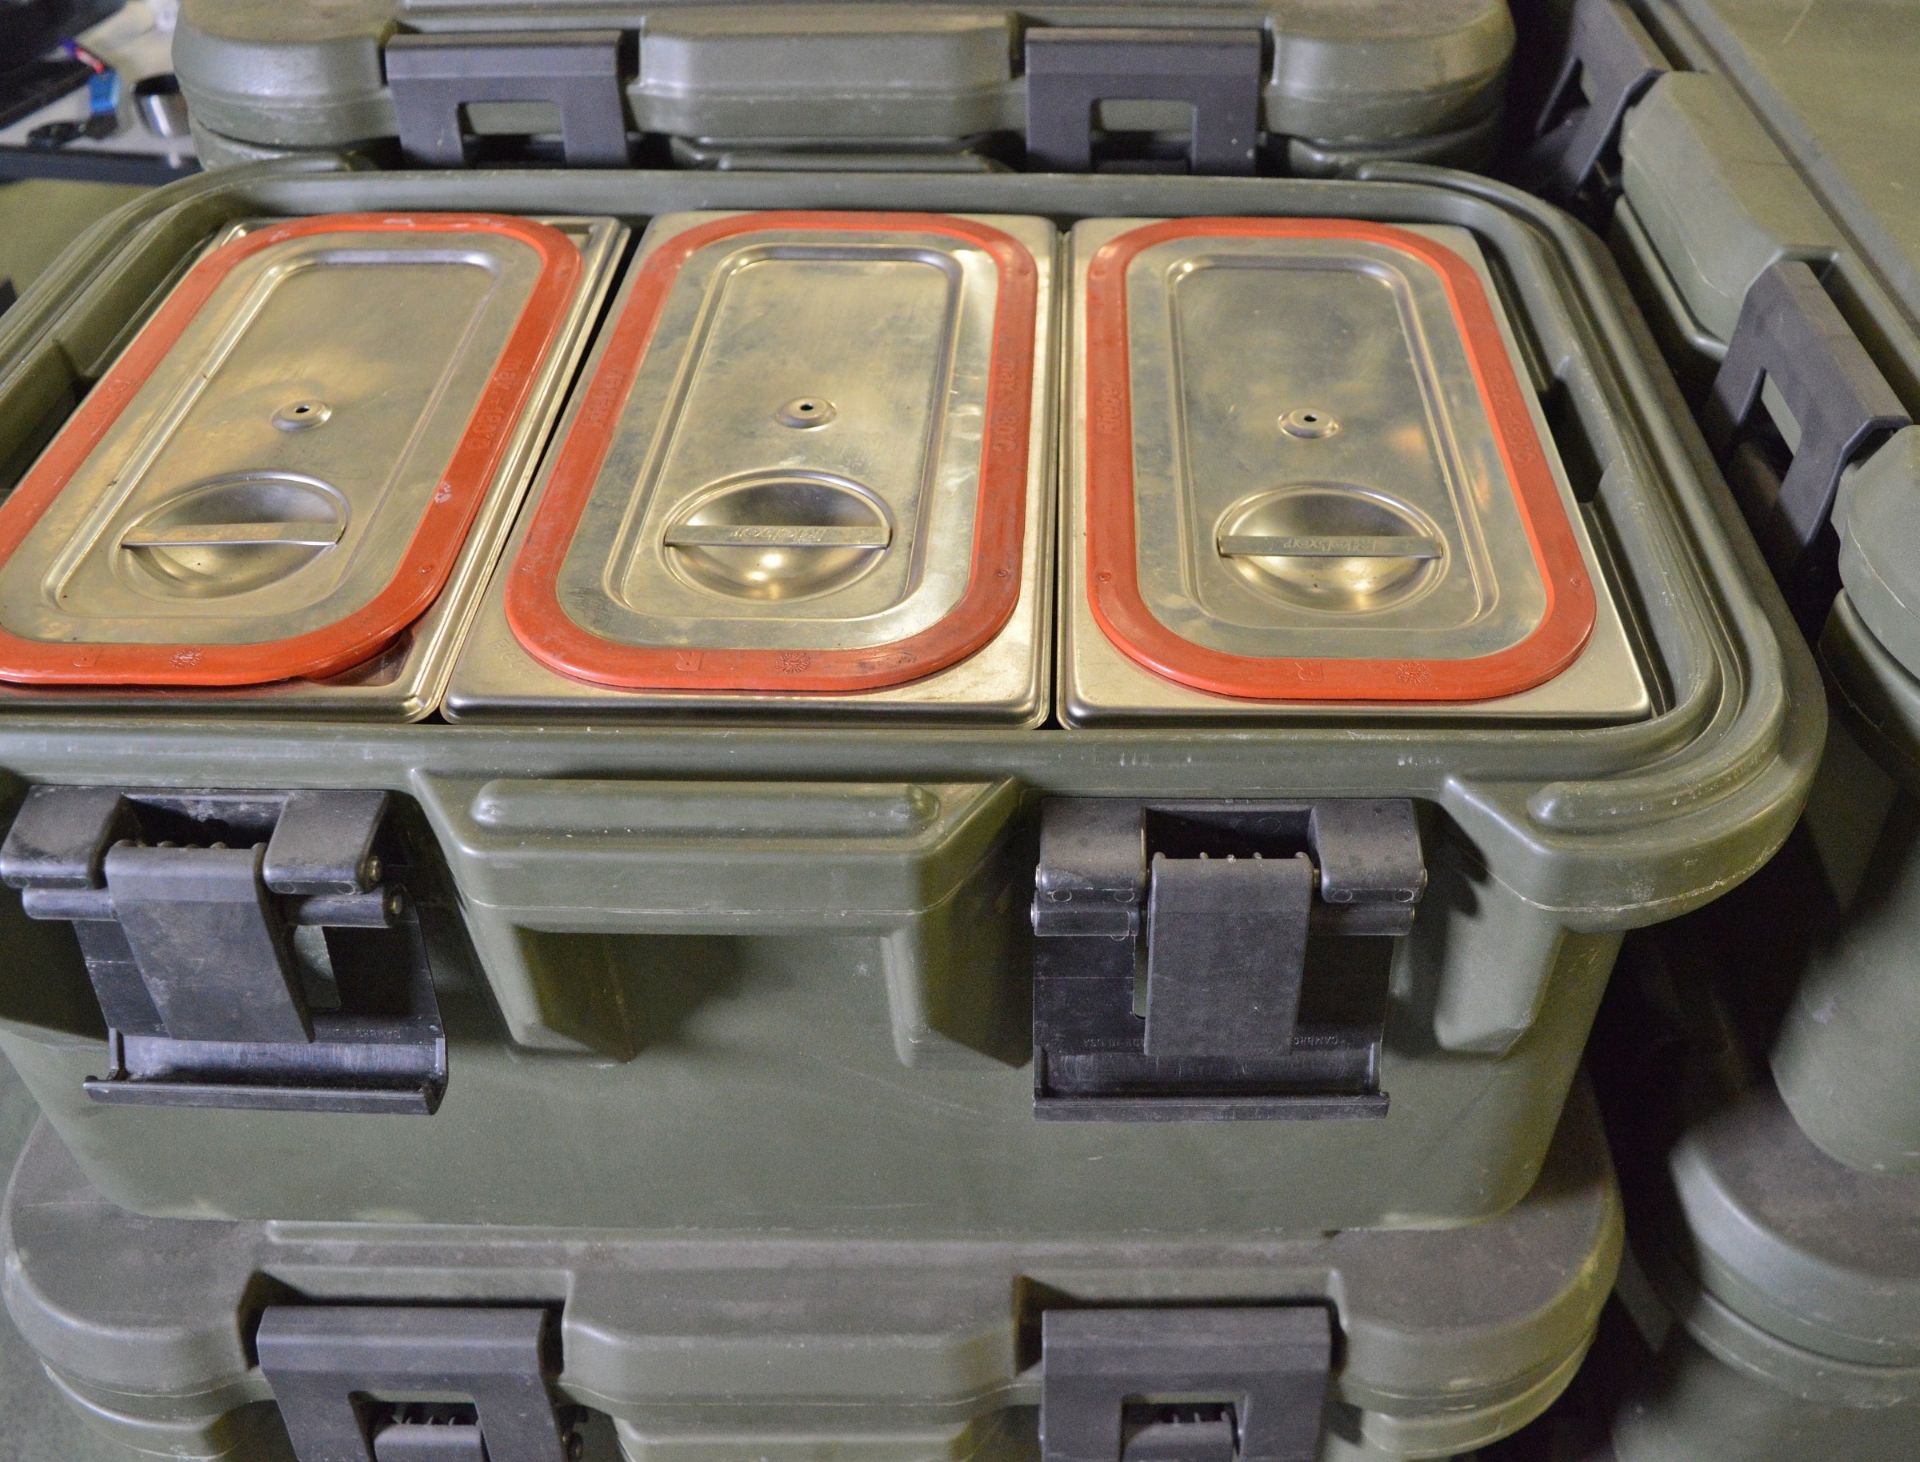 15x Cambo Green Plastic Food Containers L650 x W440 x H310mm - Complete - Image 3 of 4